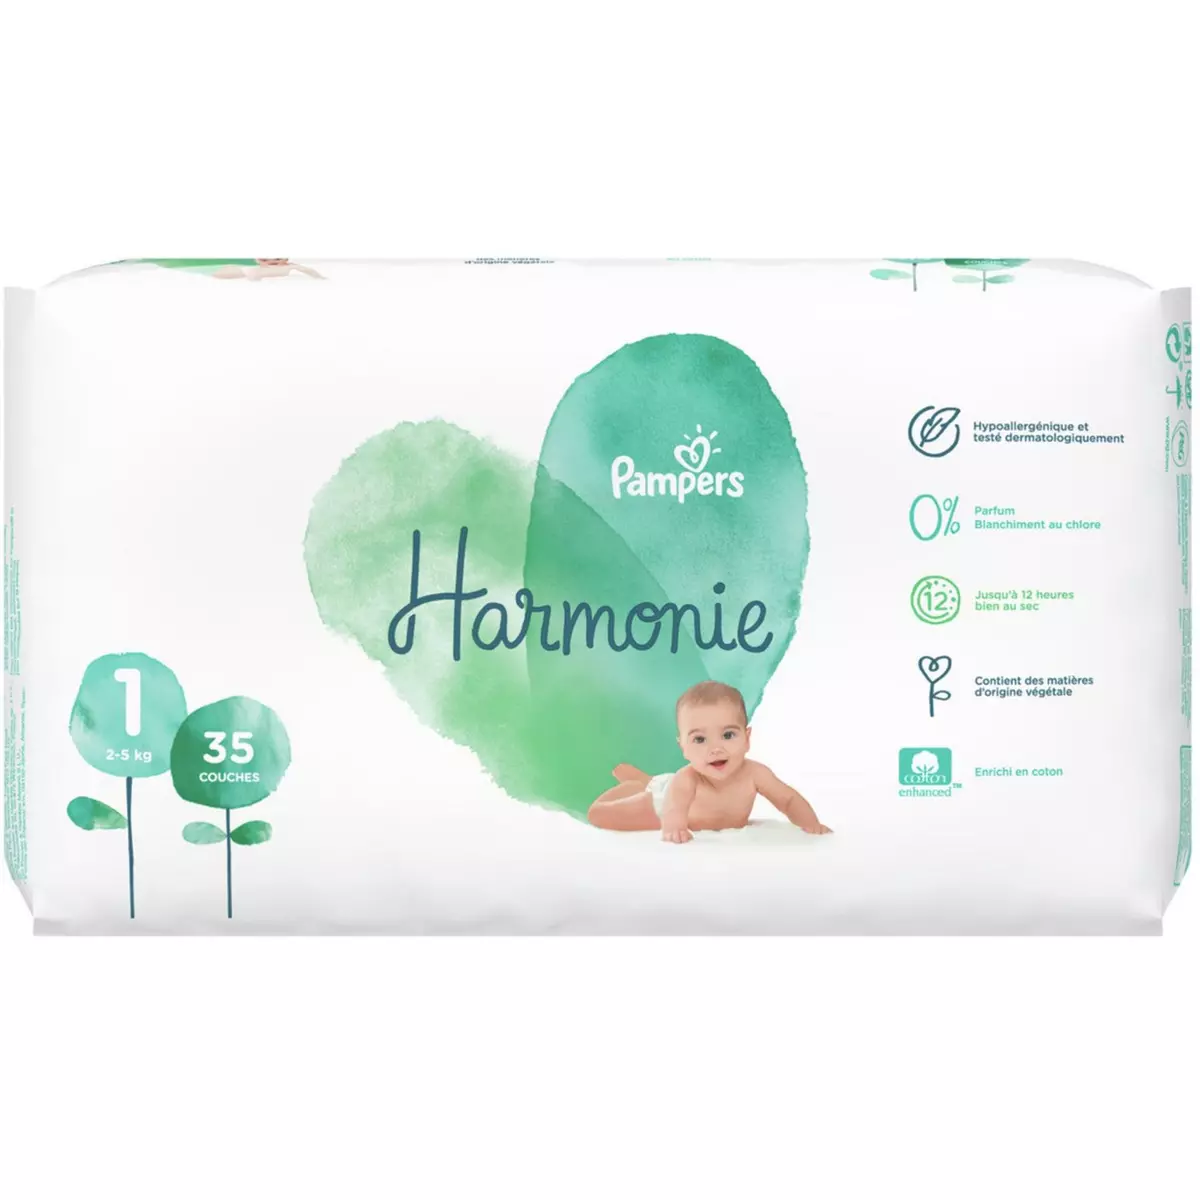 35 Couches Harmonie Taille 1 (2-5kg)